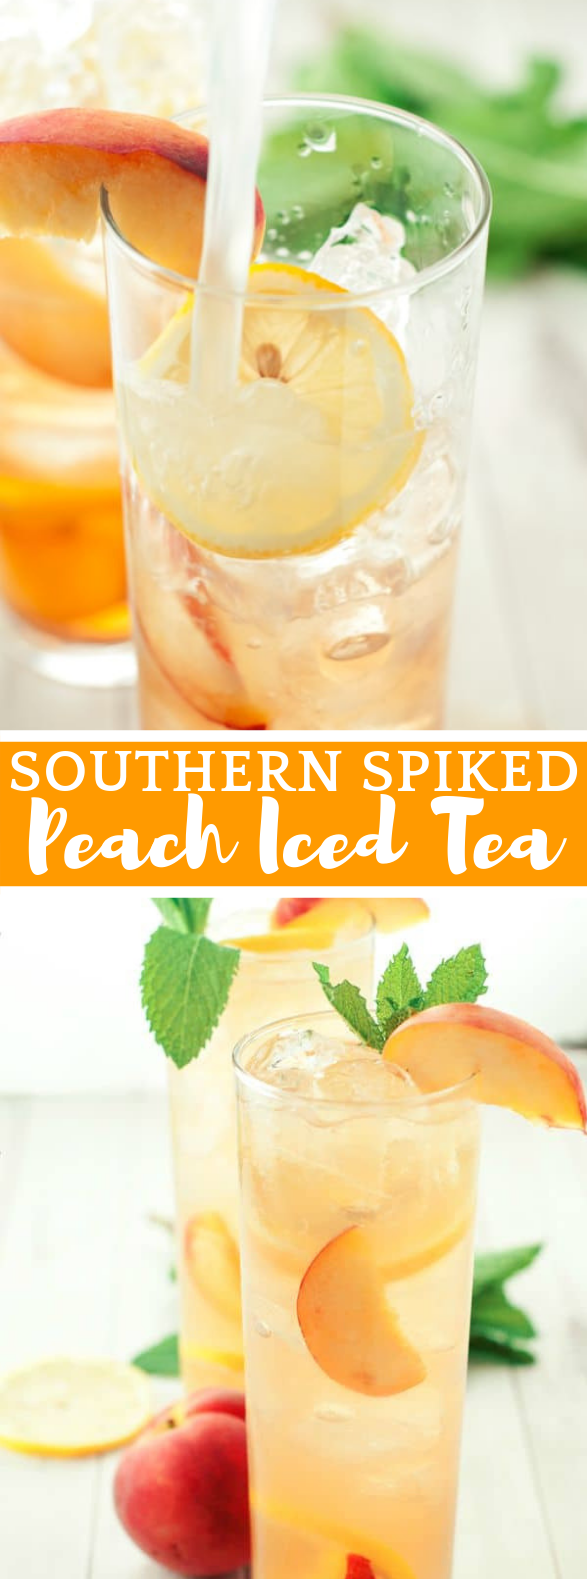 SOUTHERN SPIKED PEACH ICED TEA #drink #recipe